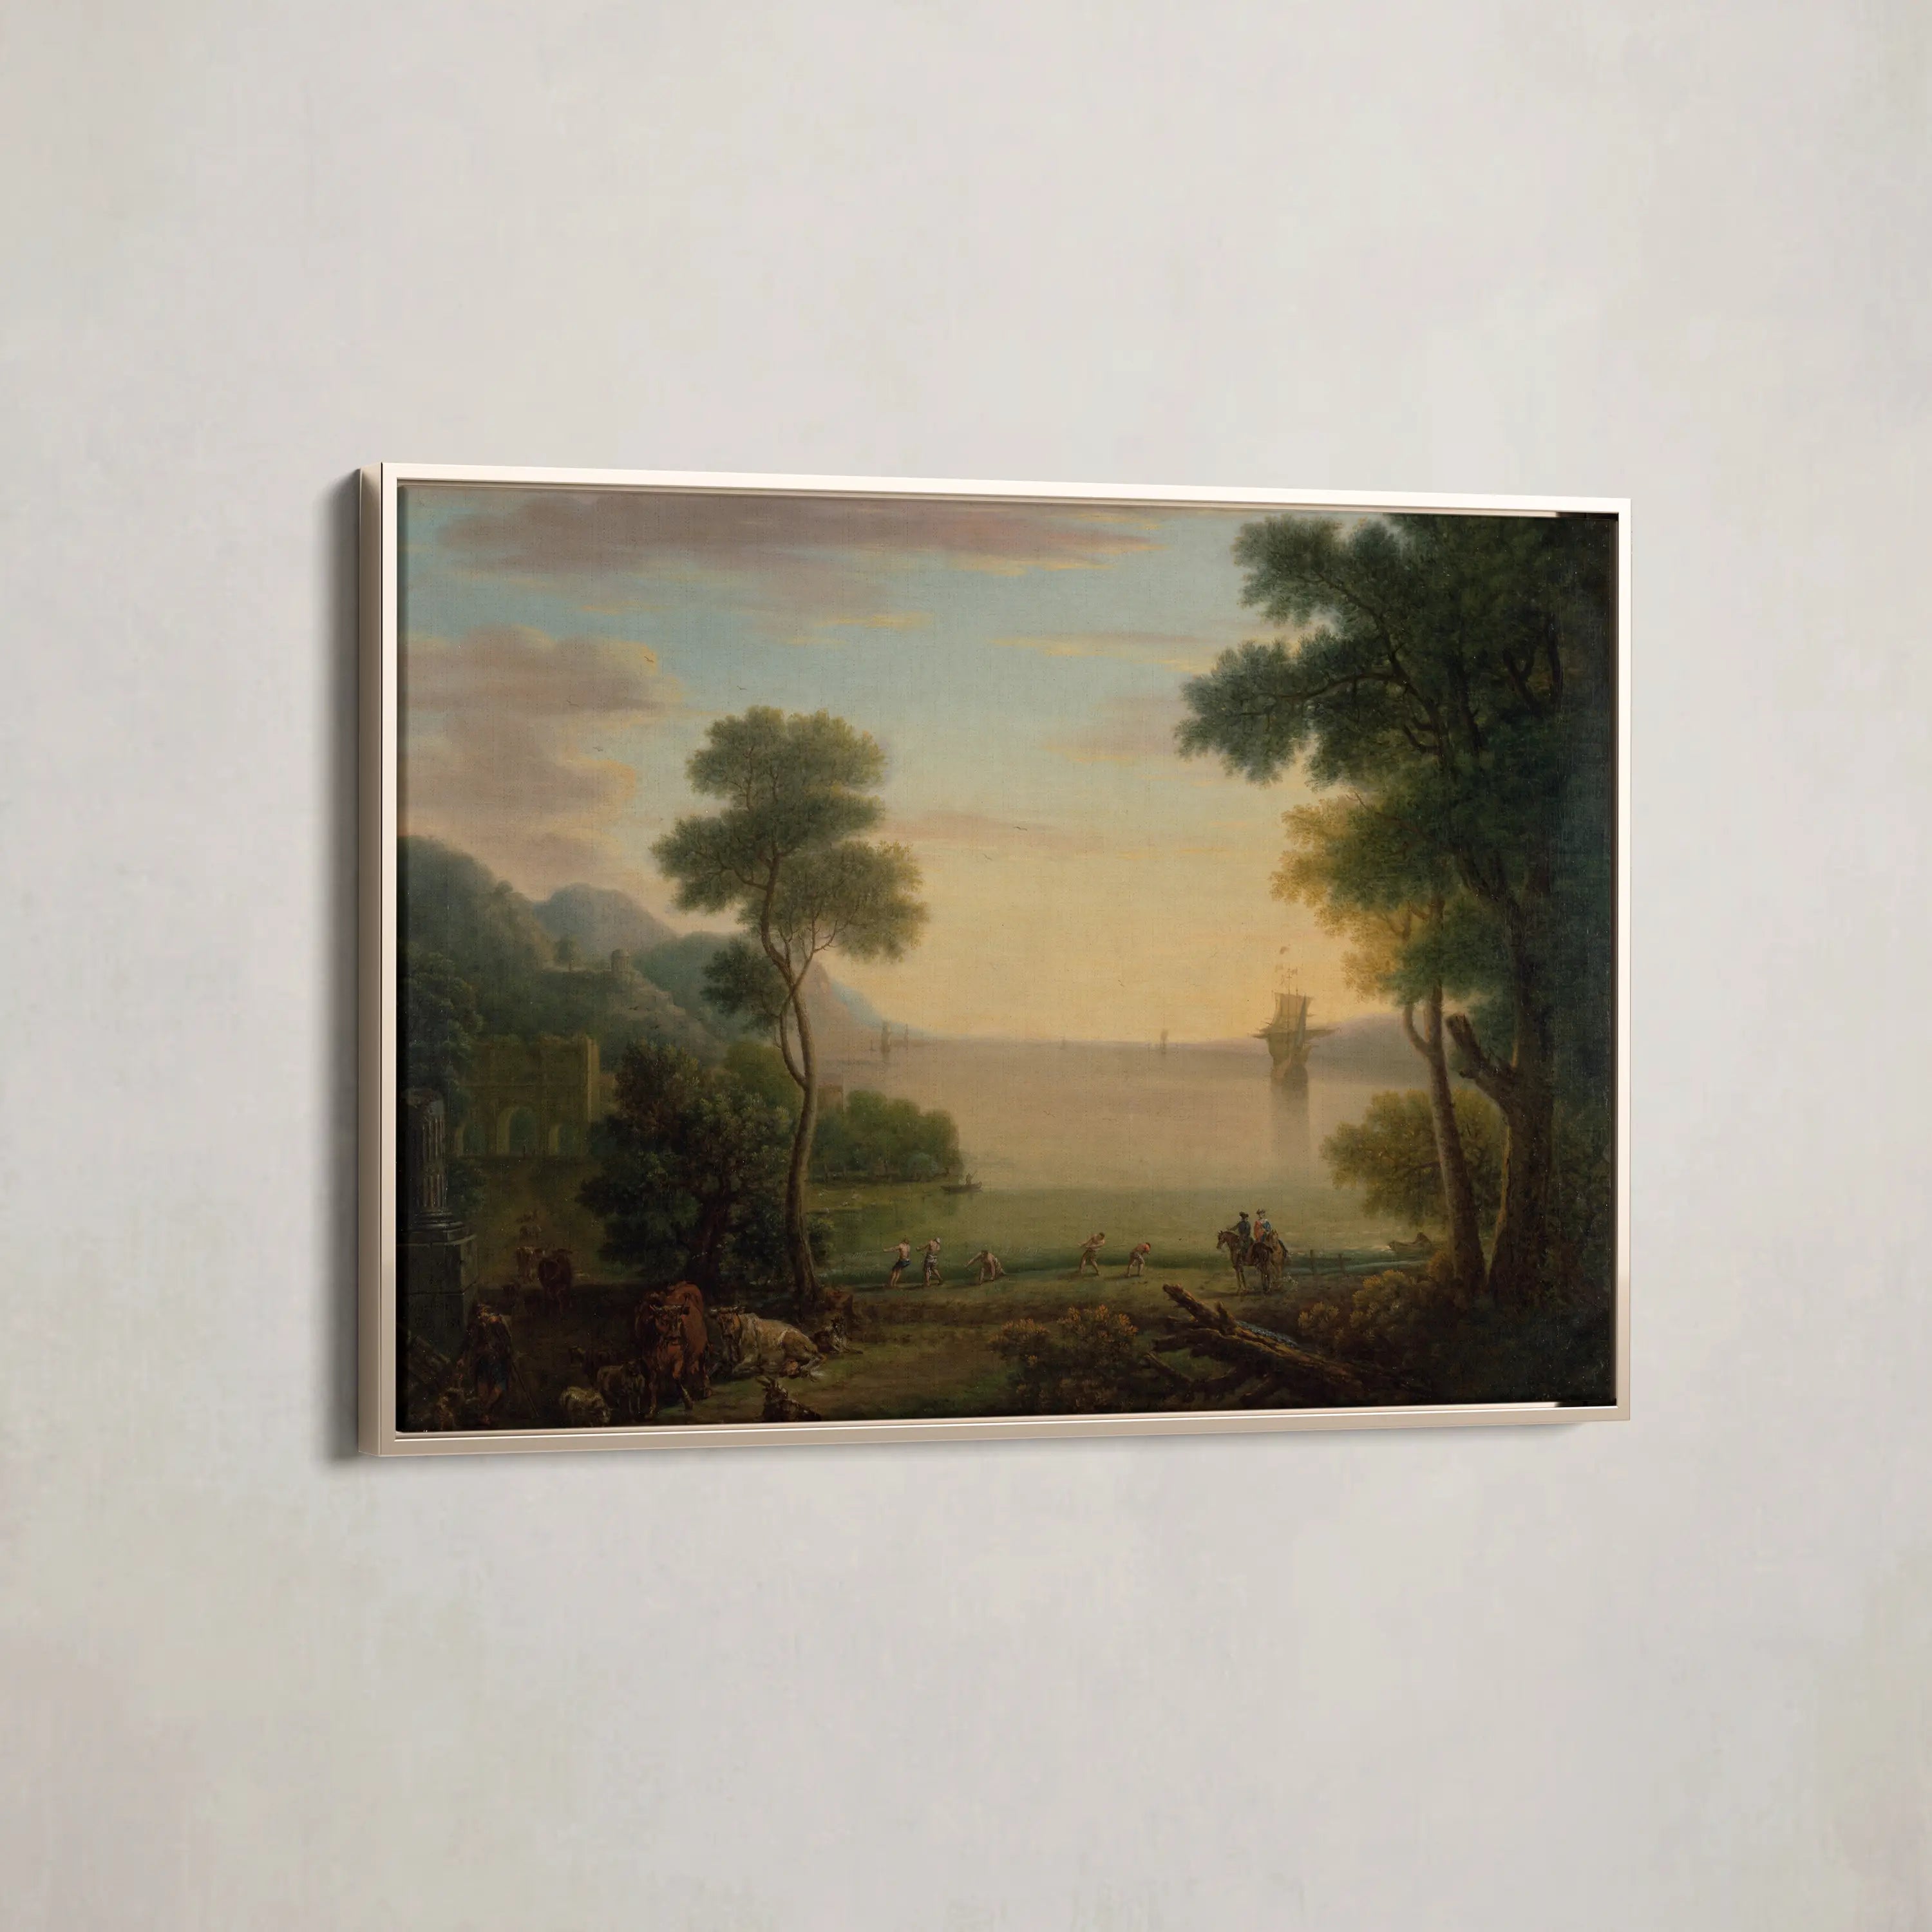 Classical Landscape with Figures and Animals; Sunset (1754) by John Wootton